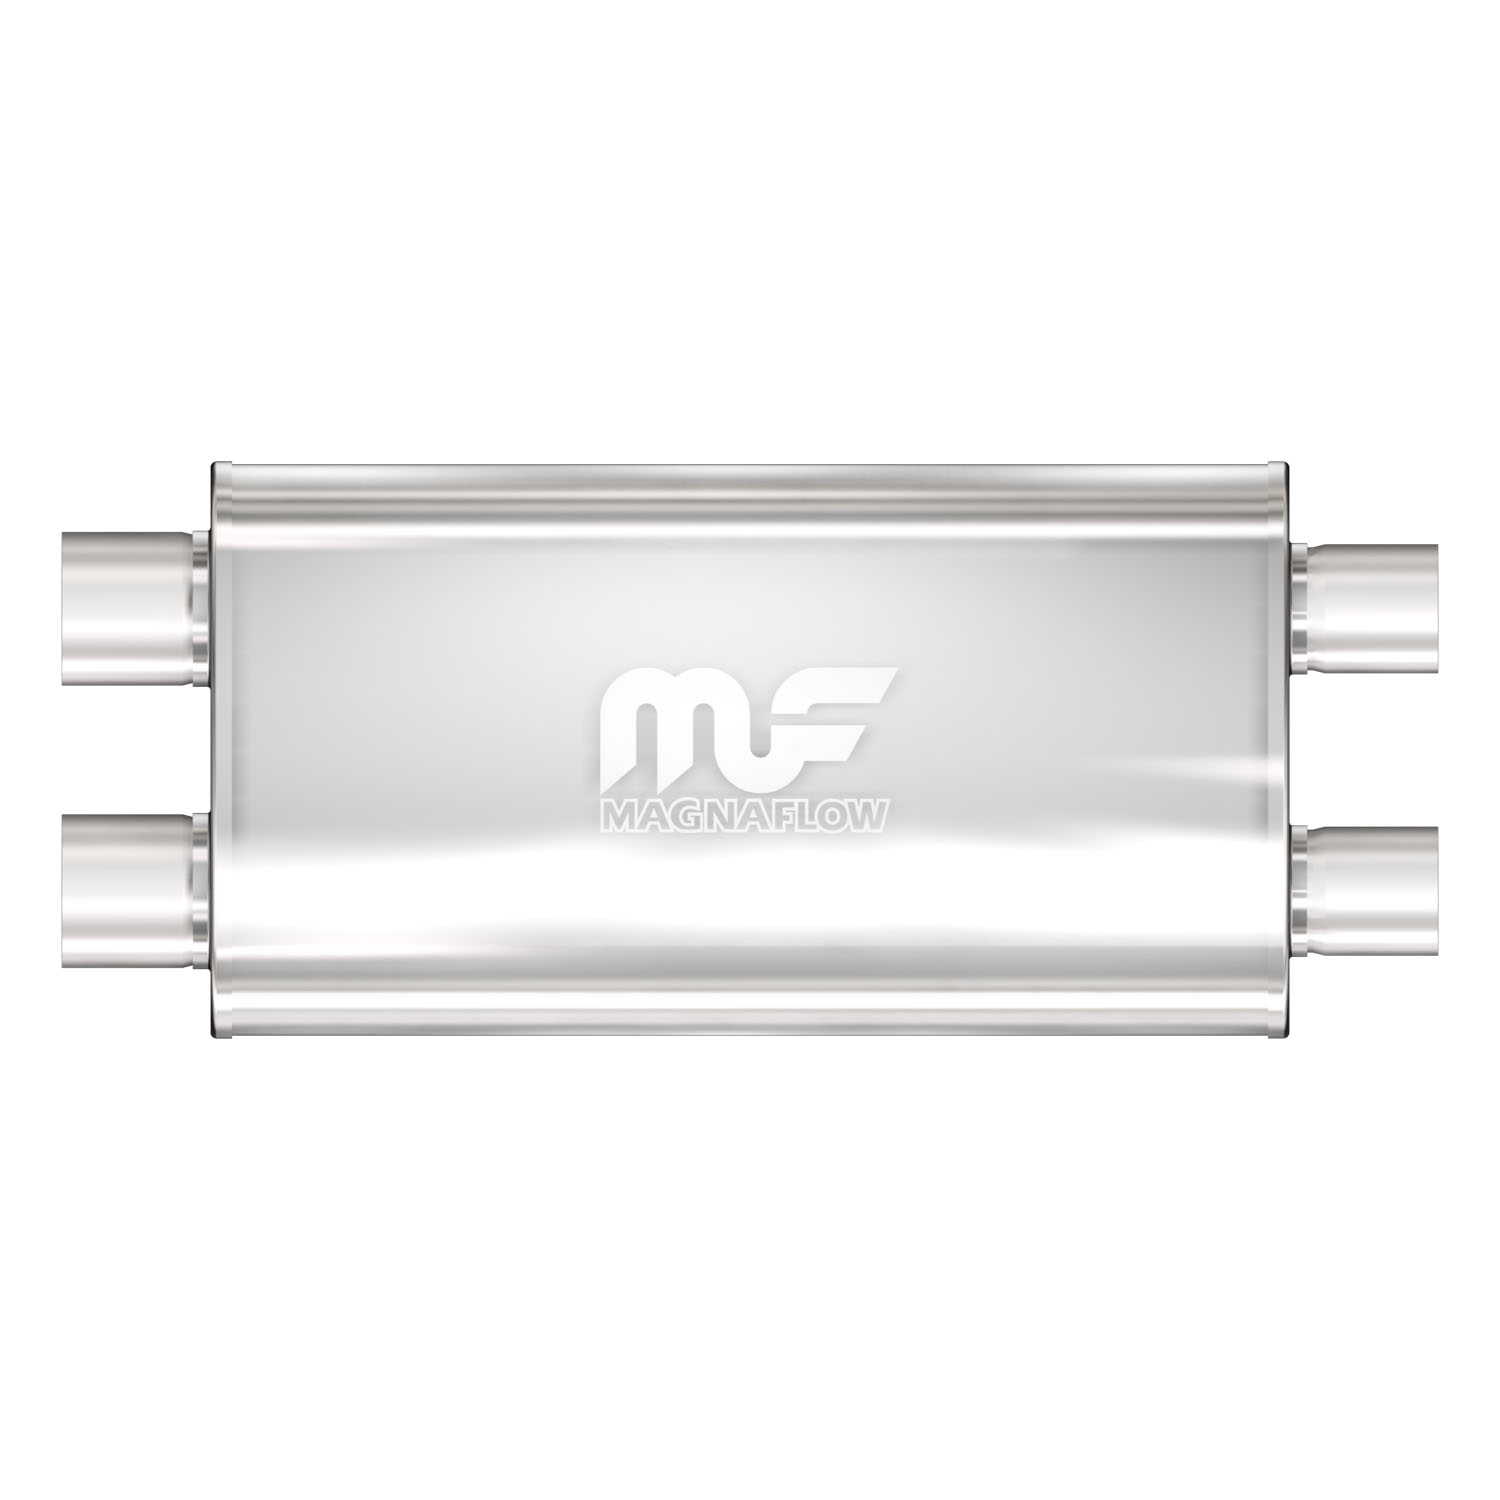 5" x 11" Oval Muffler Dual In/Dual Out: 2.5" Body Length: 22" Overall Length: 28" Core Size: 2.5" Polished Finish